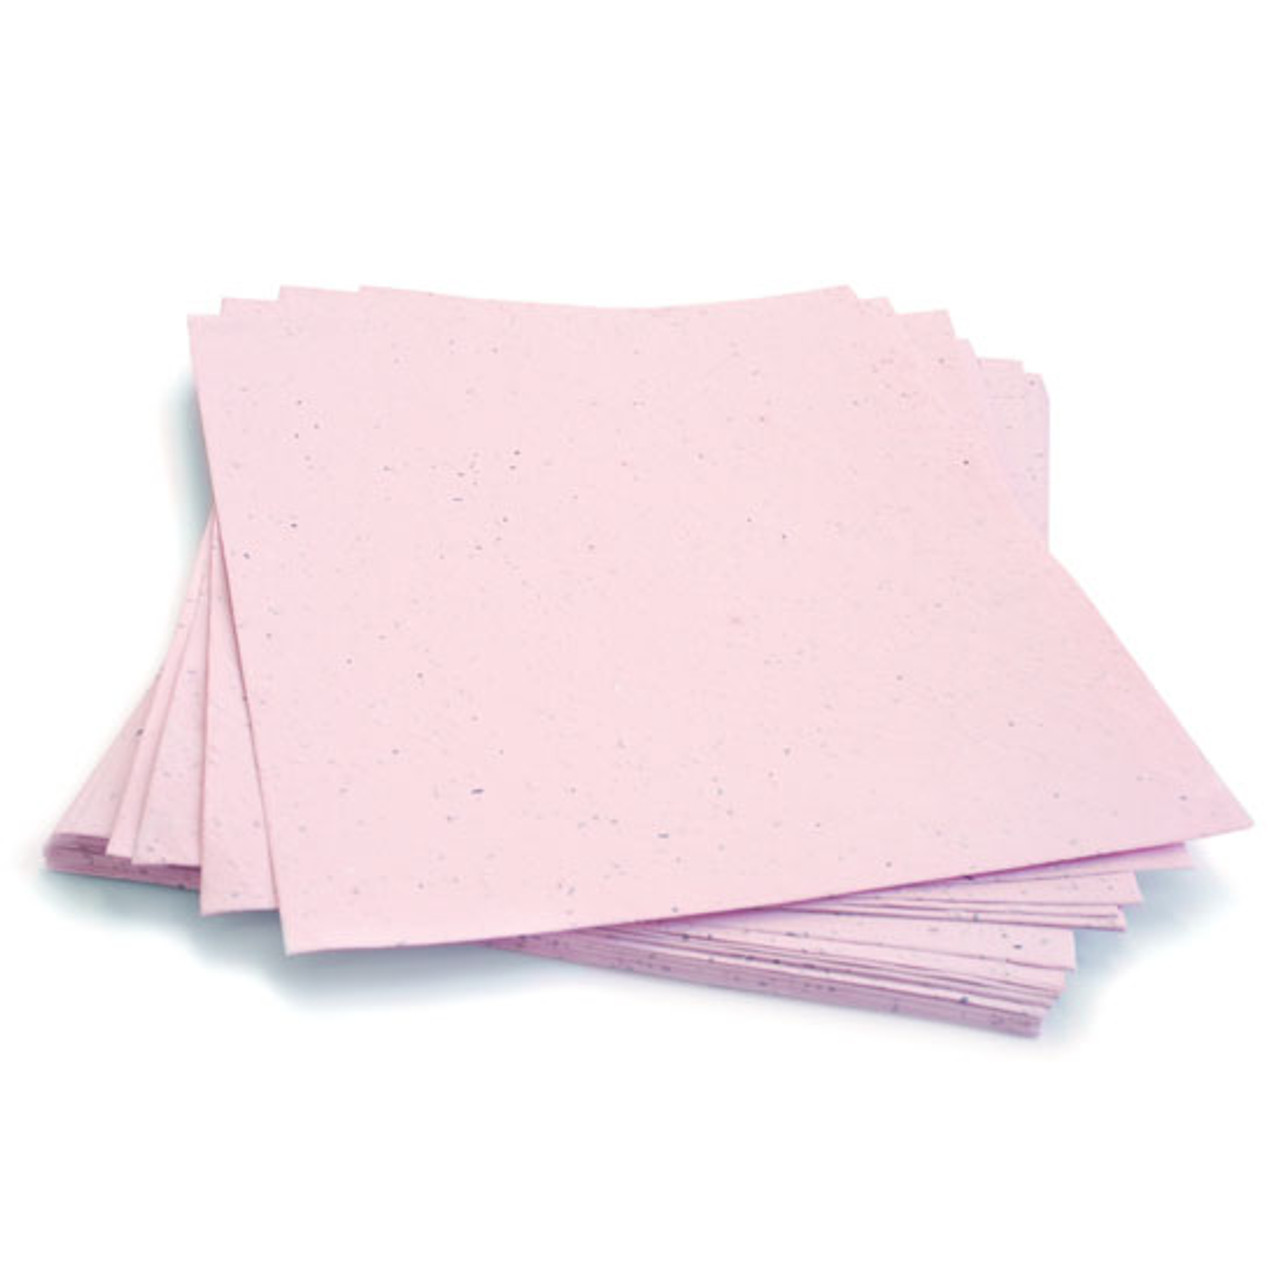 Cornflower Blue Plantable Seeded Paper Sheets with Wildflower